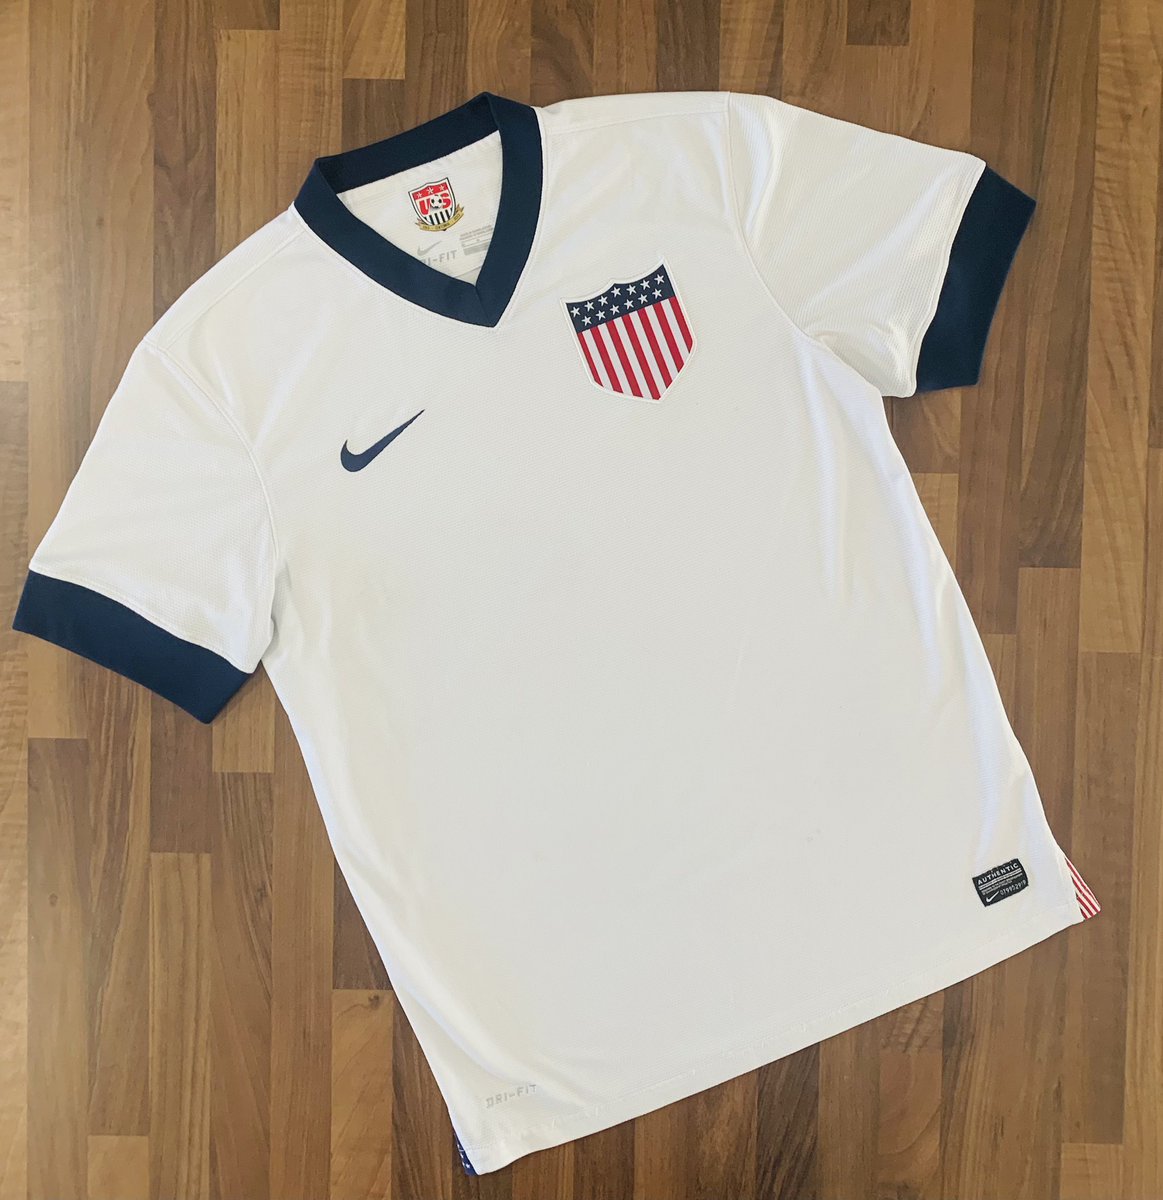 🇺🇸🇺🇸🇺🇸🇺🇸🇺🇸🇺🇸🇺🇸🇺🇸🇺🇸🇺🇸🇺🇸🇺🇸🇺🇸 This has just arrived🔥 Shout to @ThisOneKit for letting me know @USMNT centennial shirt which features huge badge & lovely stars/stripes details at the cut of the shirt👌🏻 Don’t come cleaner than this! #USA #USMNT #nike 🇺🇸🇺🇸🇺🇸🇺🇸🇺🇸🇺🇸🇺🇸🇺🇸🇺🇸🇺🇸🇺🇸🇺🇸🇺🇸